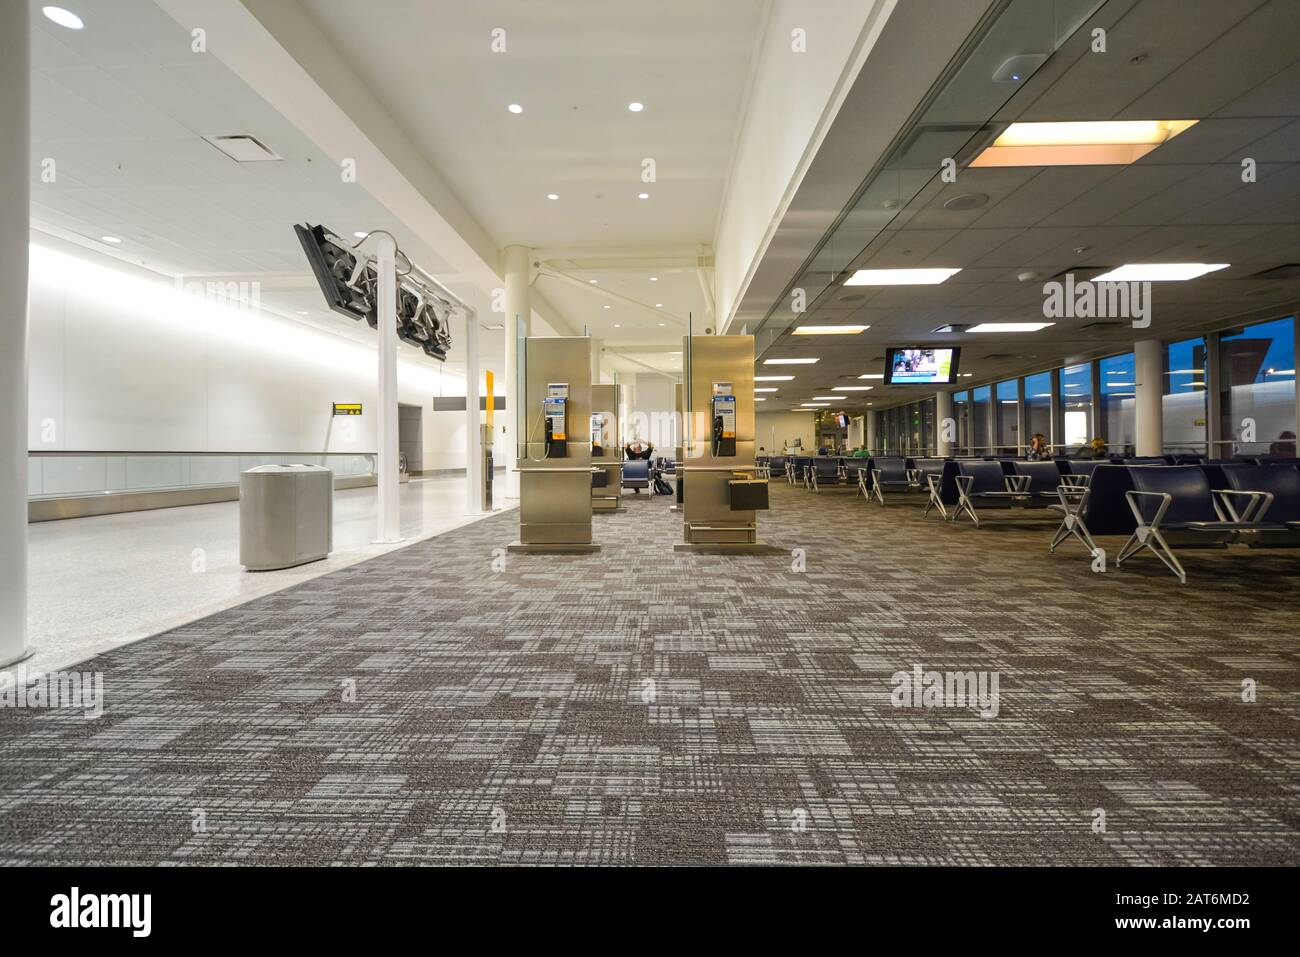 Almost empty airport Terminal early in the morning with very few passengers waiting. Stock Photo